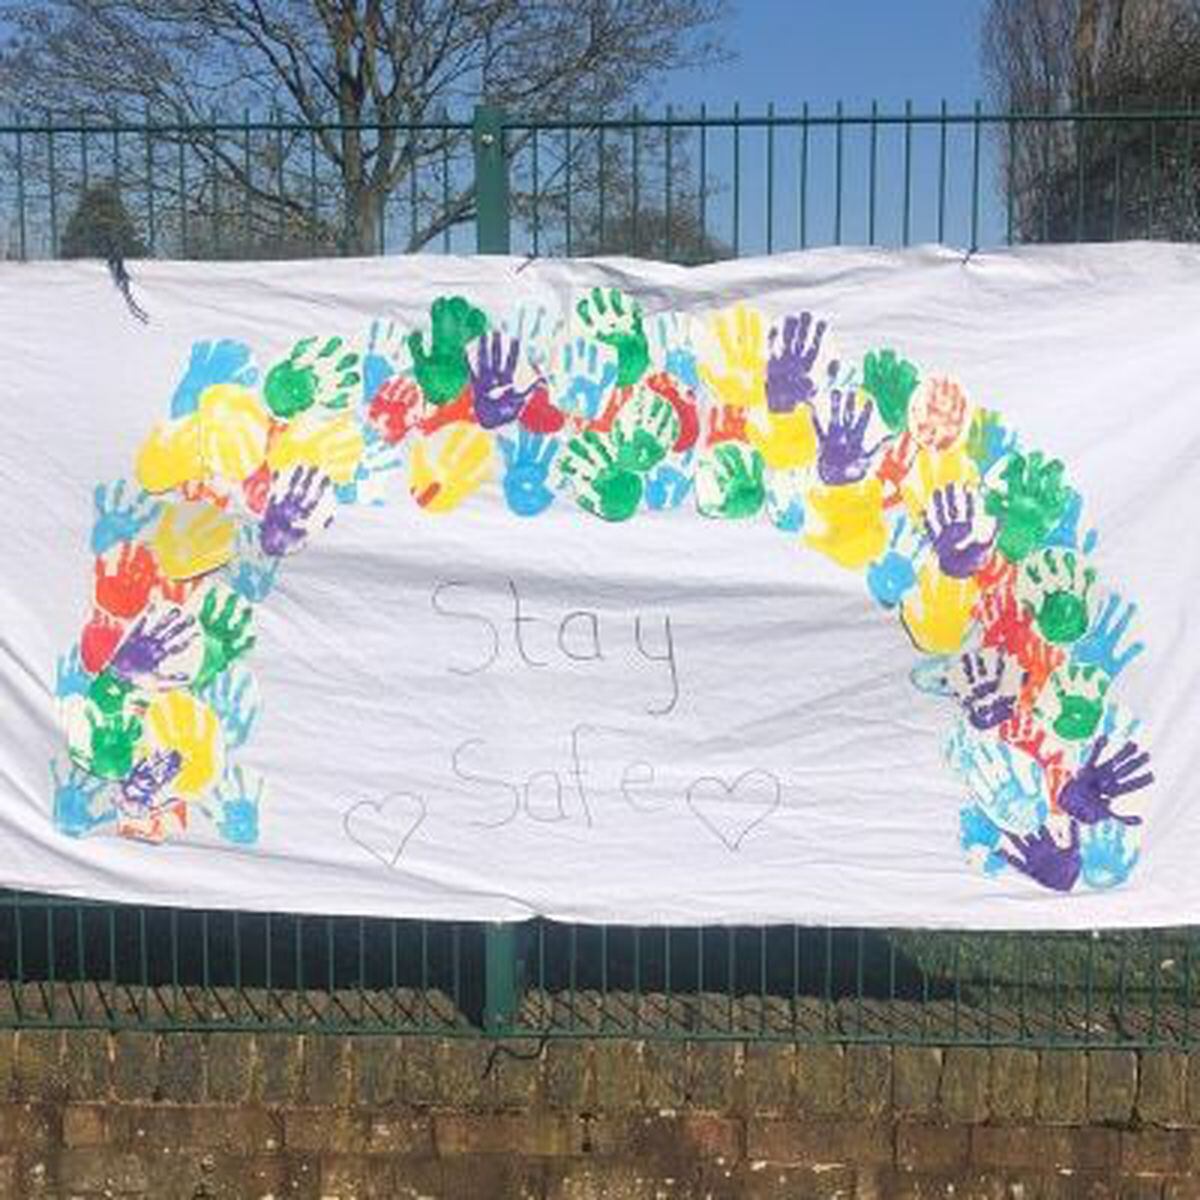 A rainbow created by pupils at Deyncourt Primary School, Wolverhampton